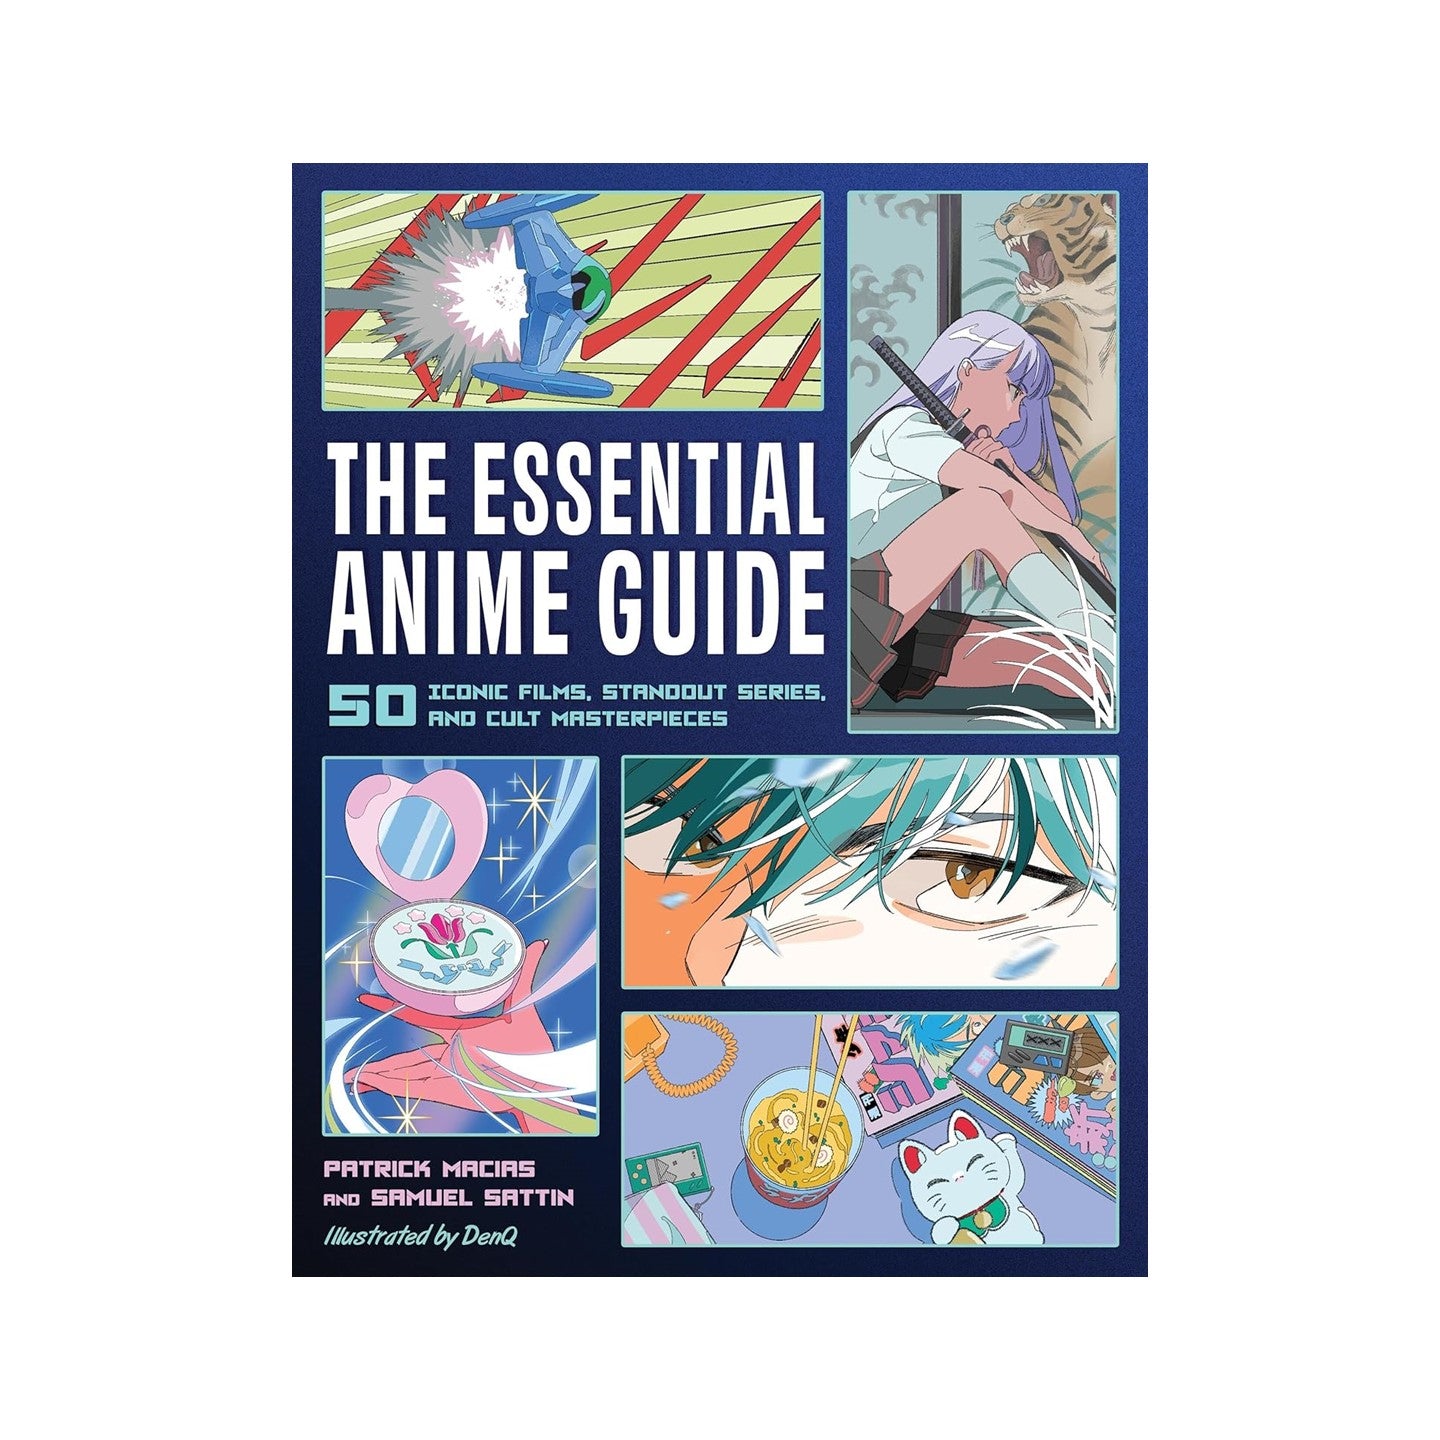 The Essential Anime Guide: 50 Iconic Films, Standout Series, and